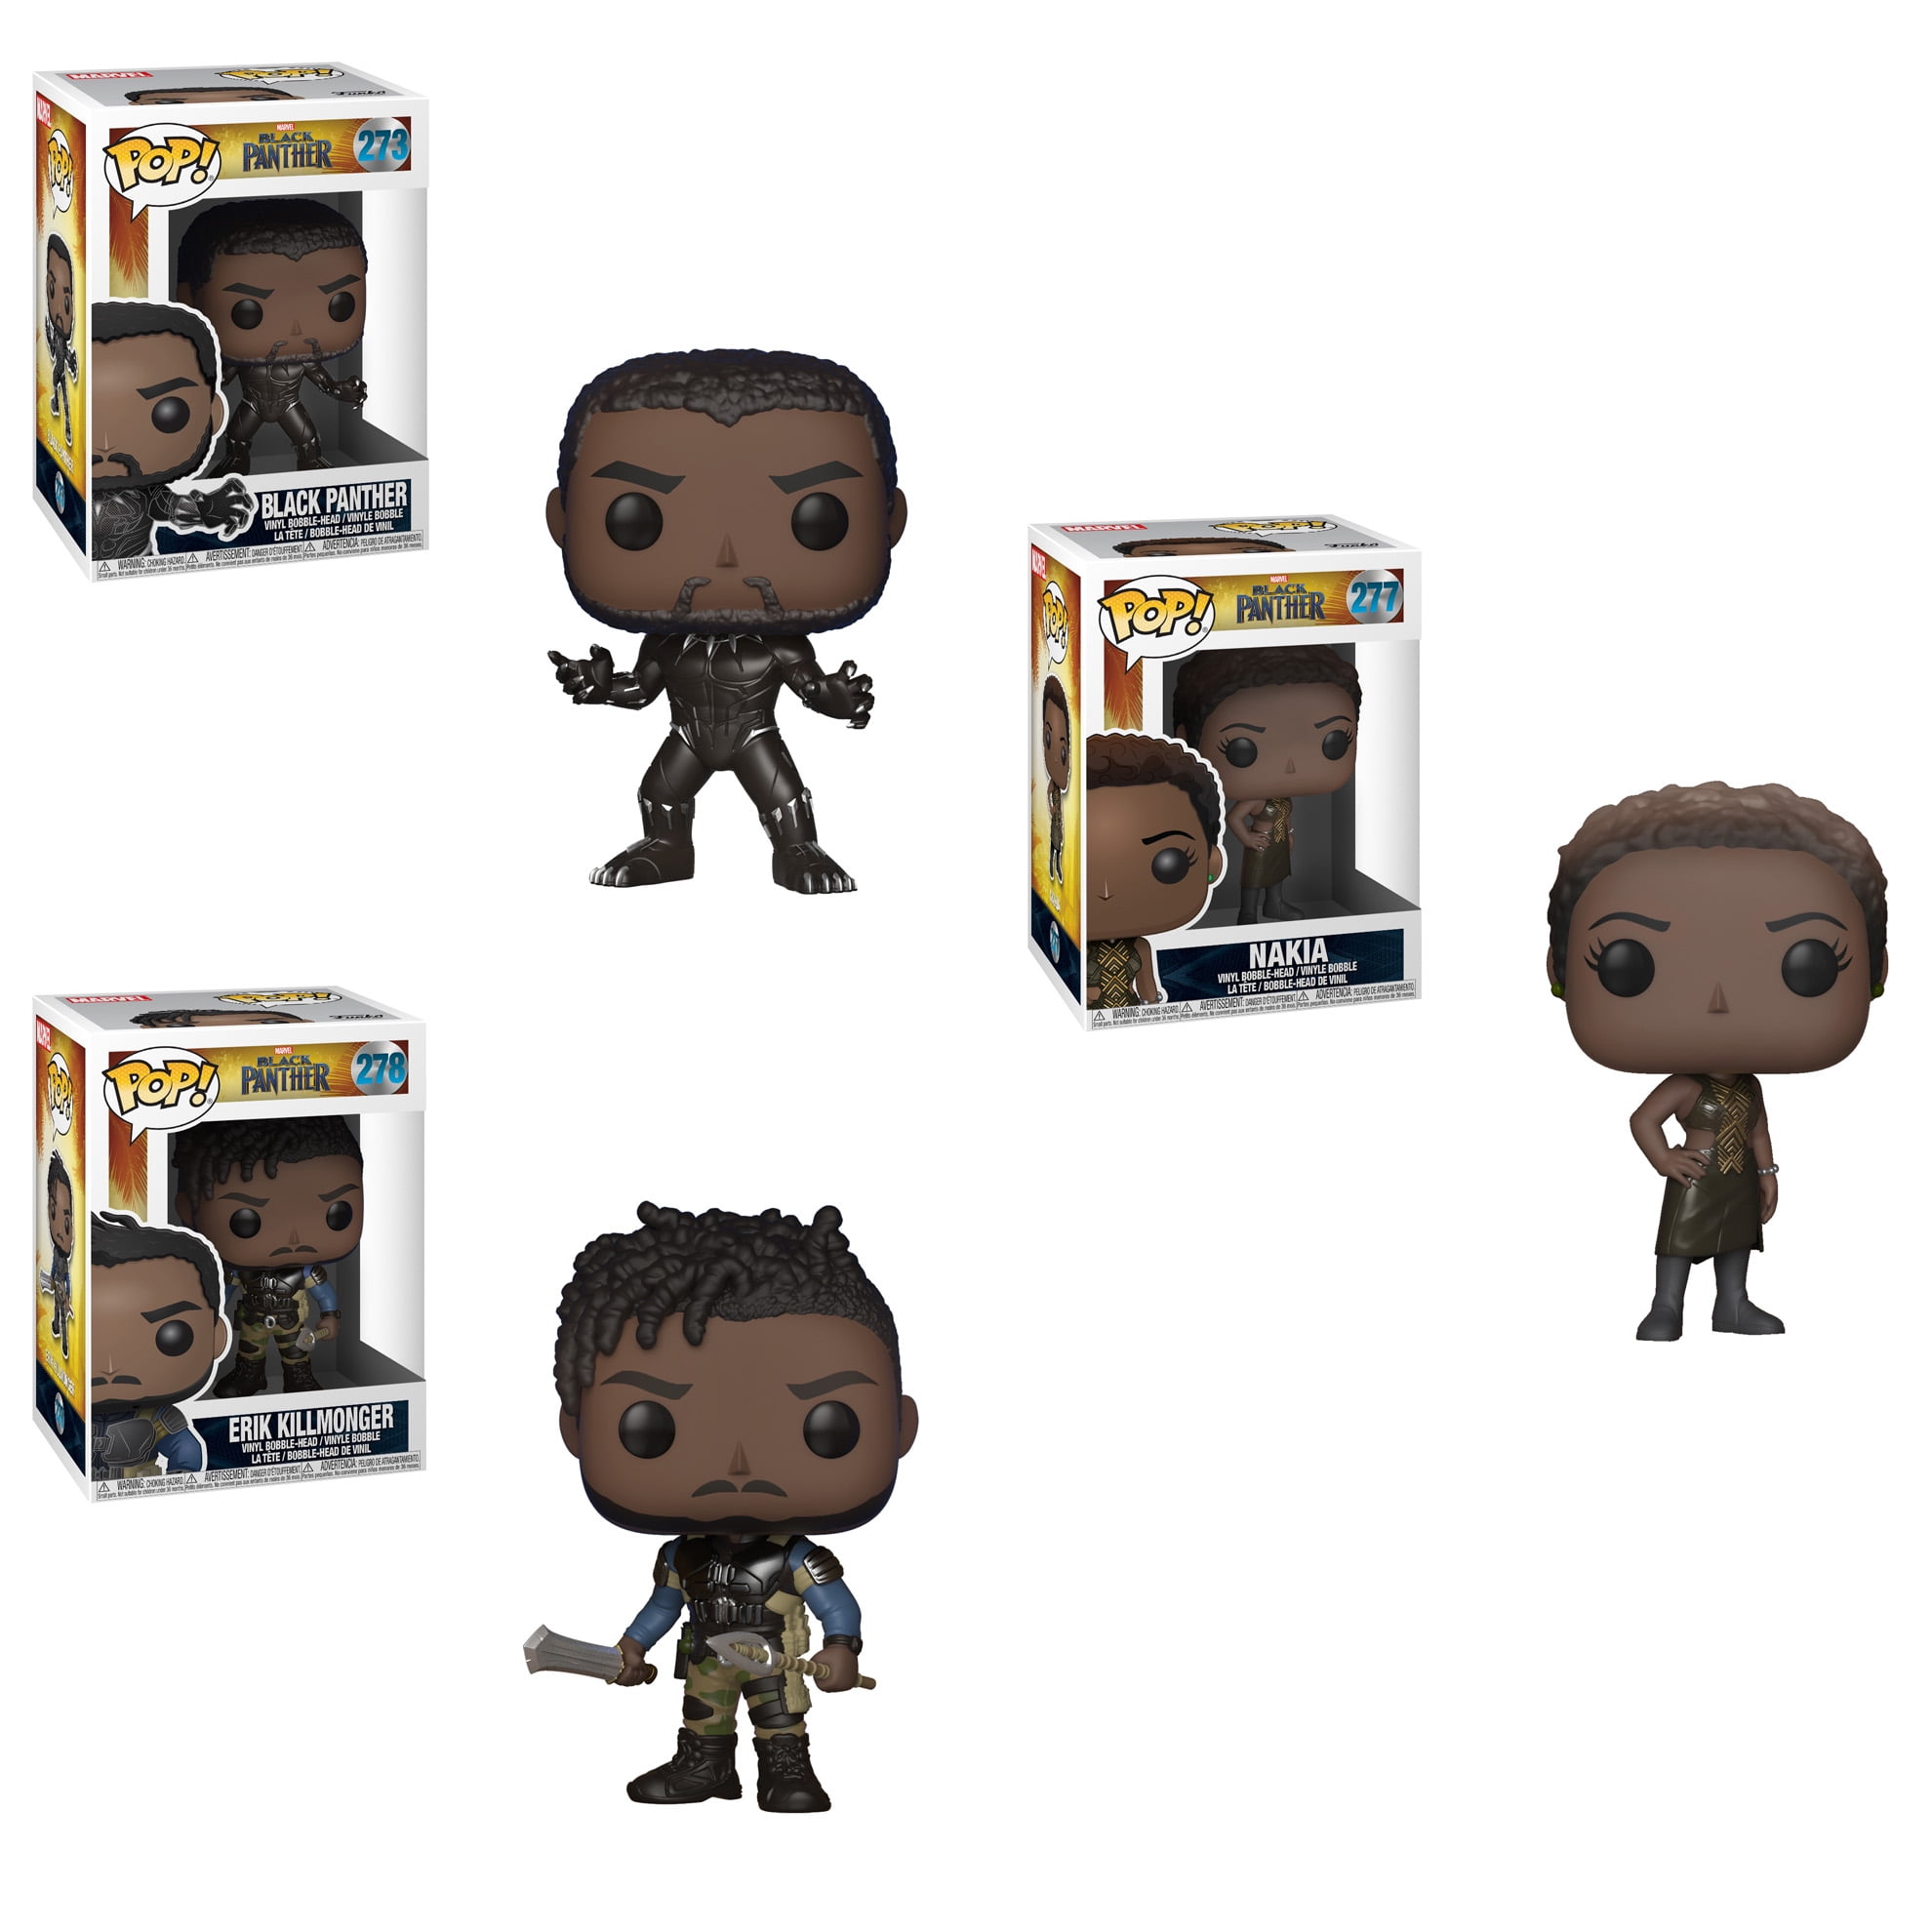 Funko POP! Movies Panther Collectors Set; Black Panther (Possible Limited Chase Edition), Nakia, Kimonger (Possible Limited Chase Edition) - Walmart.com